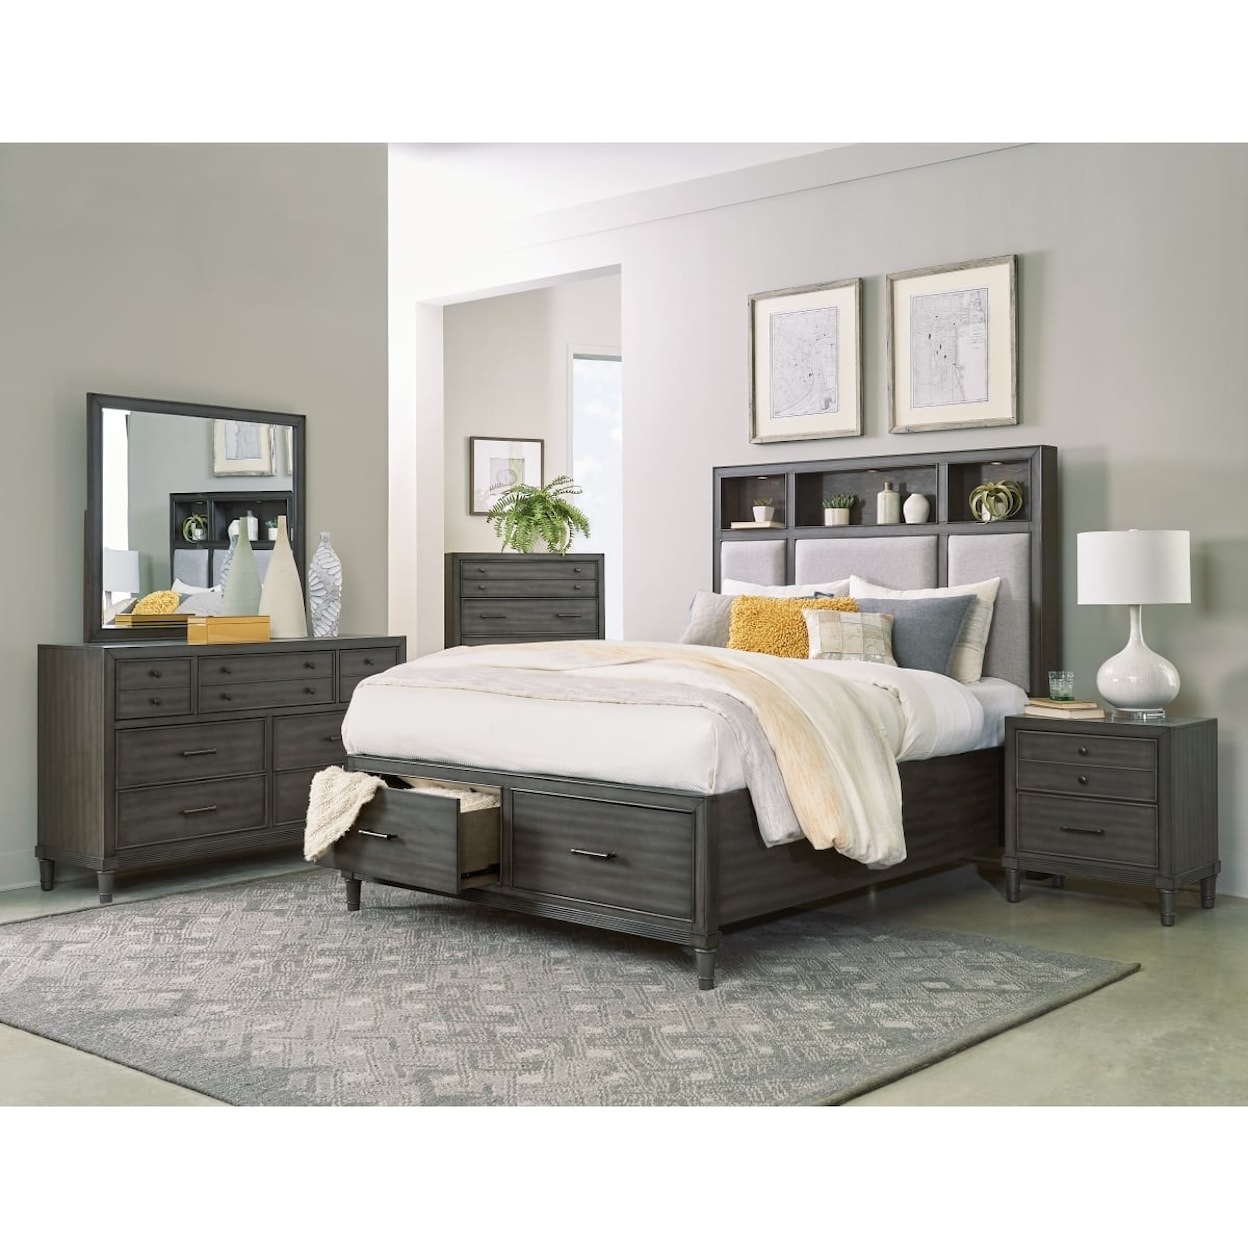 Homelegance Wittenberry King  Bed